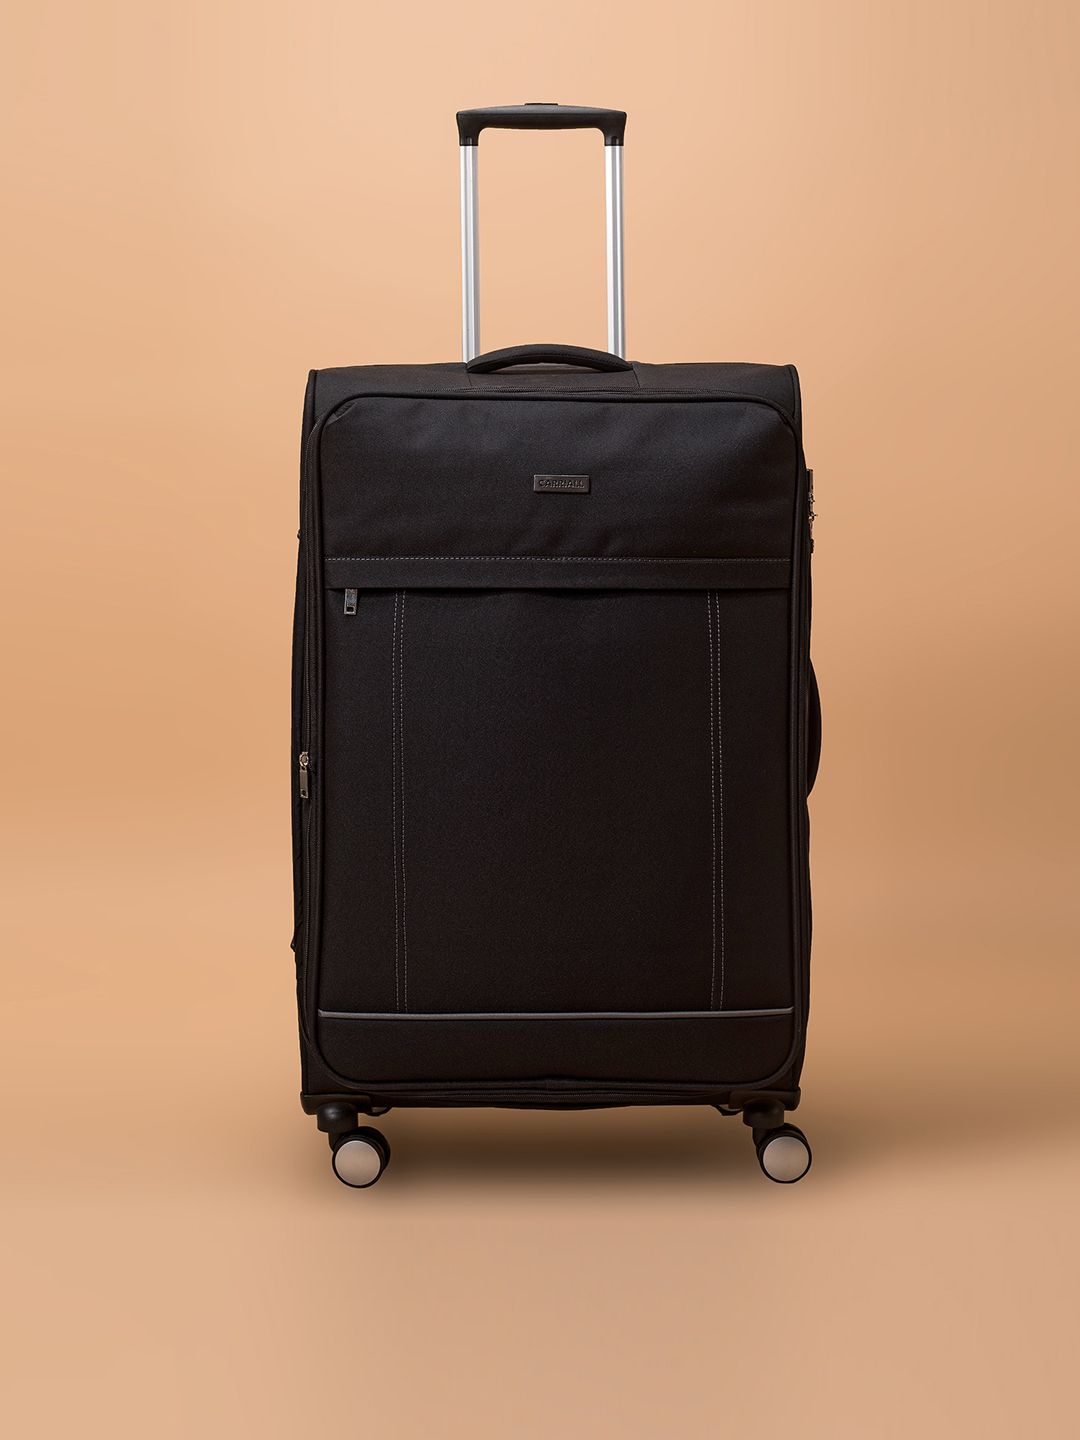 CARRIALL Black Solid Soft-Sided Large Trolley Suitcase Price in India